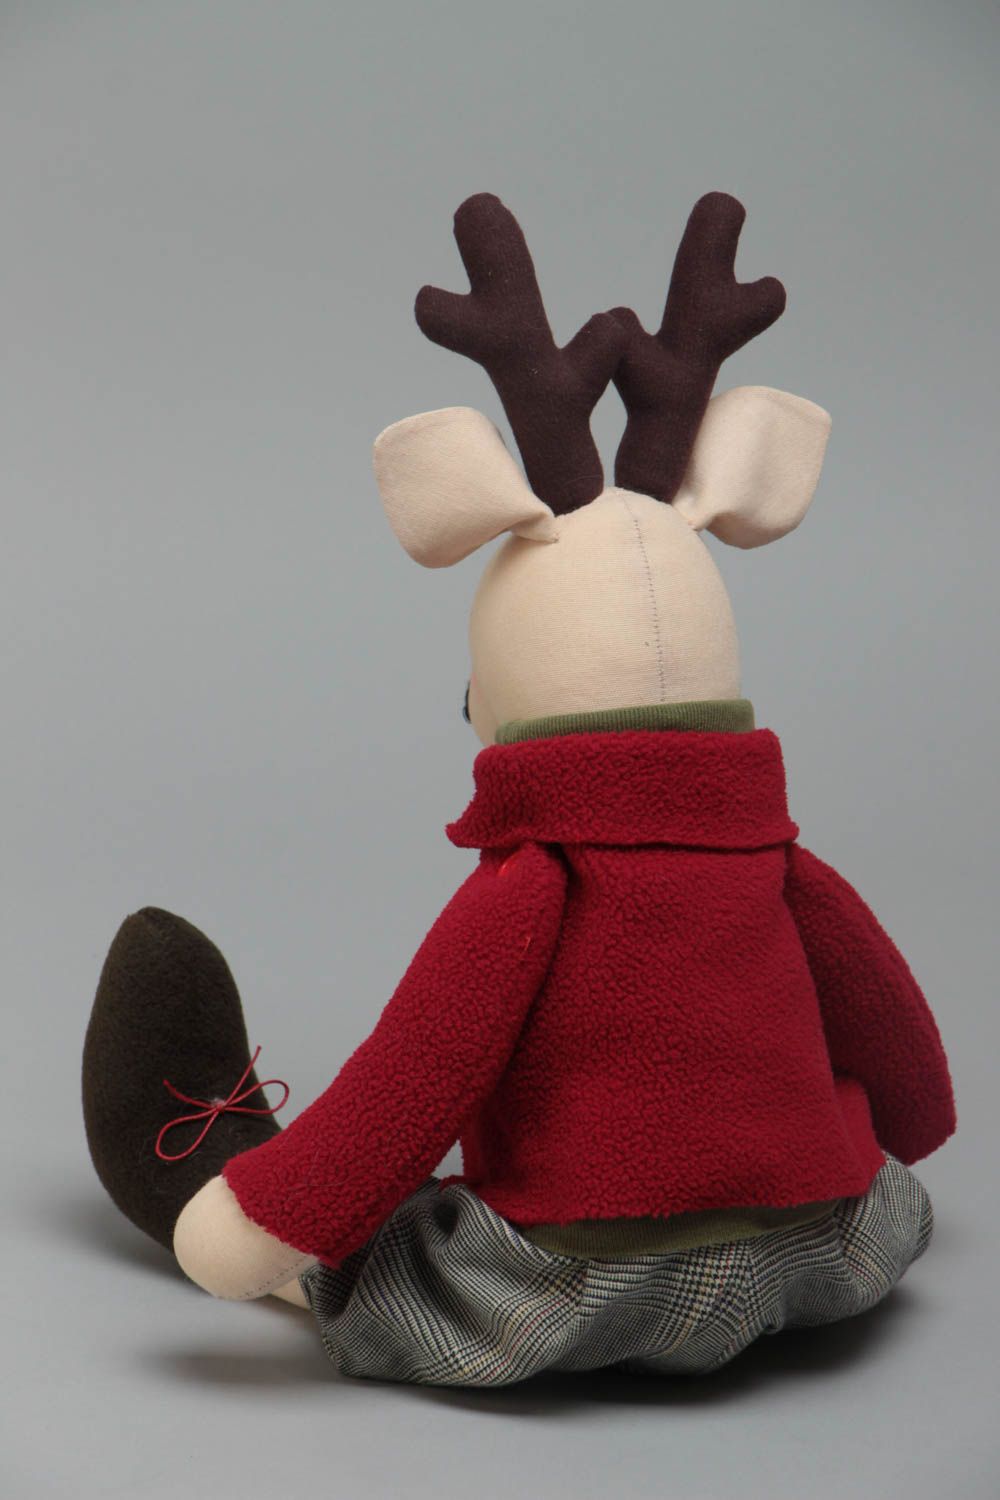 Handmade designer fabric soft toy Deer in red jacket for kids and interior decor photo 4